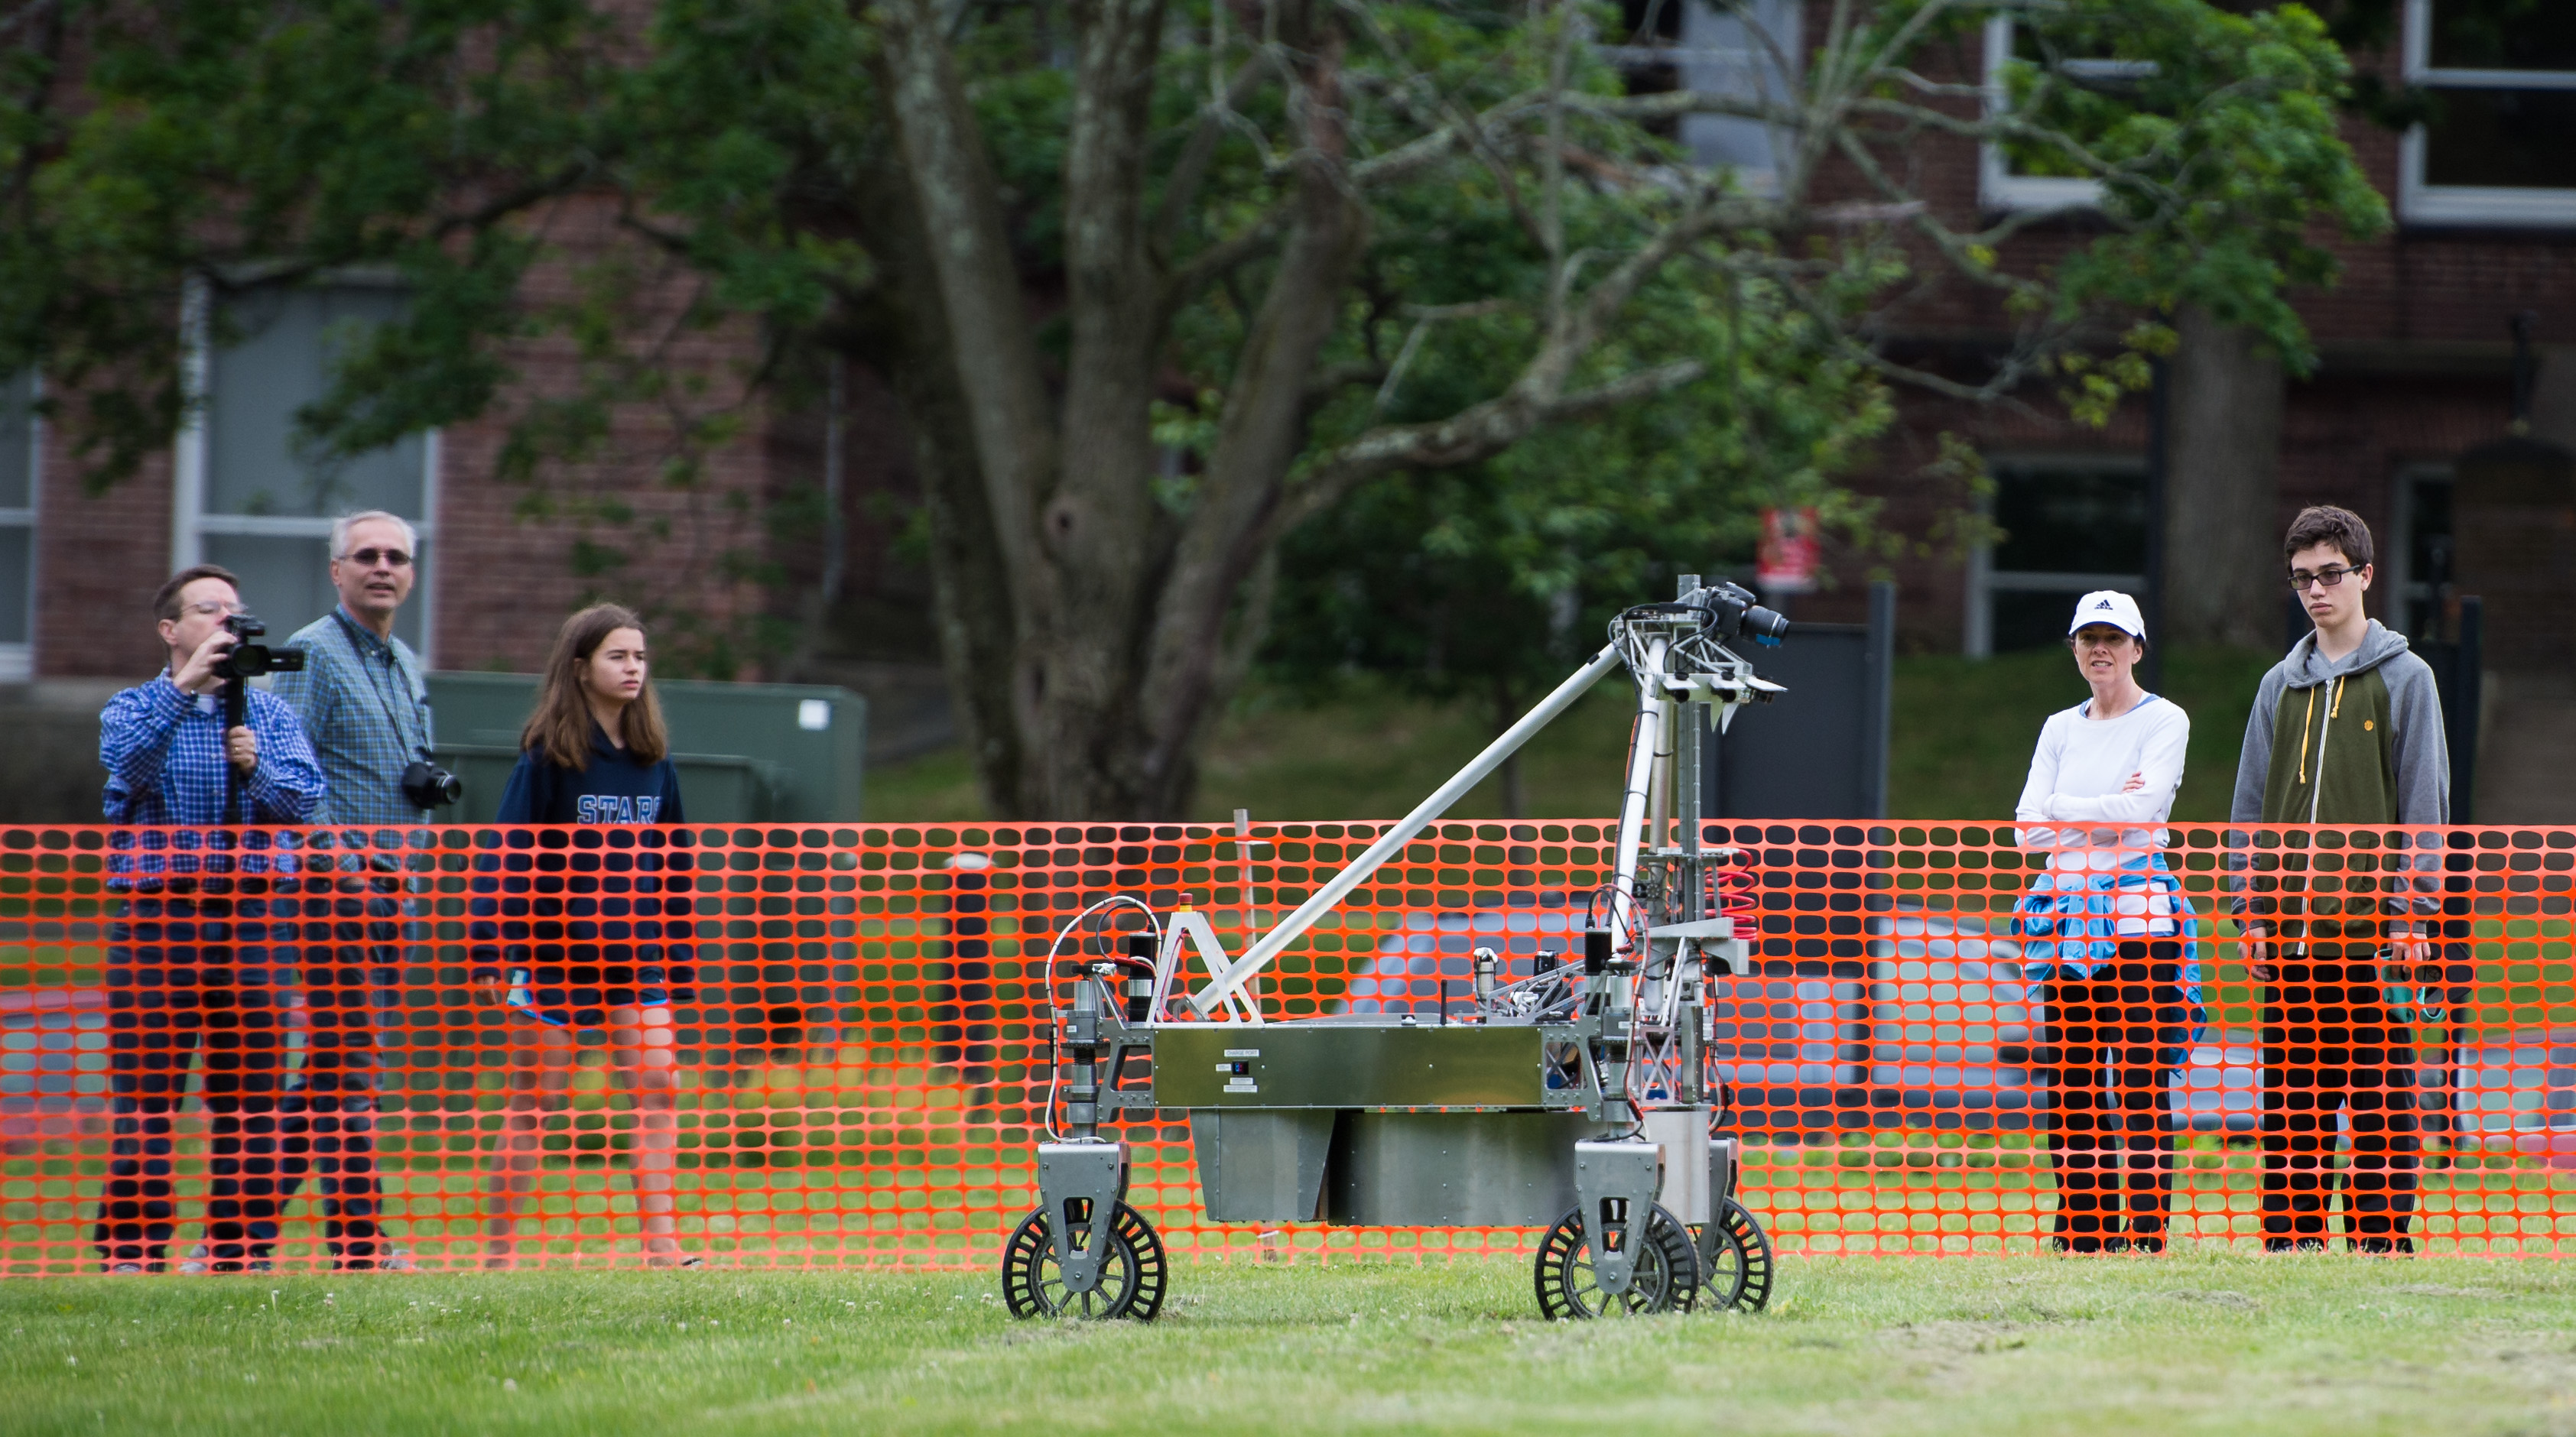 The team Survey robot is seen as it conducts a demonstration of the level two challenge during the 2014 NASA Centennial Challenges Sample Return Robot Challenge, Thursday, June 12, 2014, at the Worcester Polytechnic Institute (WPI) in Worcester, Mass.   Eighteen teams are competing for a $1.5 million NASA prize purse. Teams will be required to demonstrate autonomous robots that can locate and collect samples from a wide and varied terrain, operating without human control. The objective of this NASA-WPI Centennial Challenge is to encourage innovations in autonomous navigation and robotics technologies. Innovations stemming from the challenge may improve NASA's capability to explore a variety of destinations in space, as well as enhance the nation's robotic technology for use in industries and applications on Earth. Photo Credit: (NASA/Joel Kowsky)